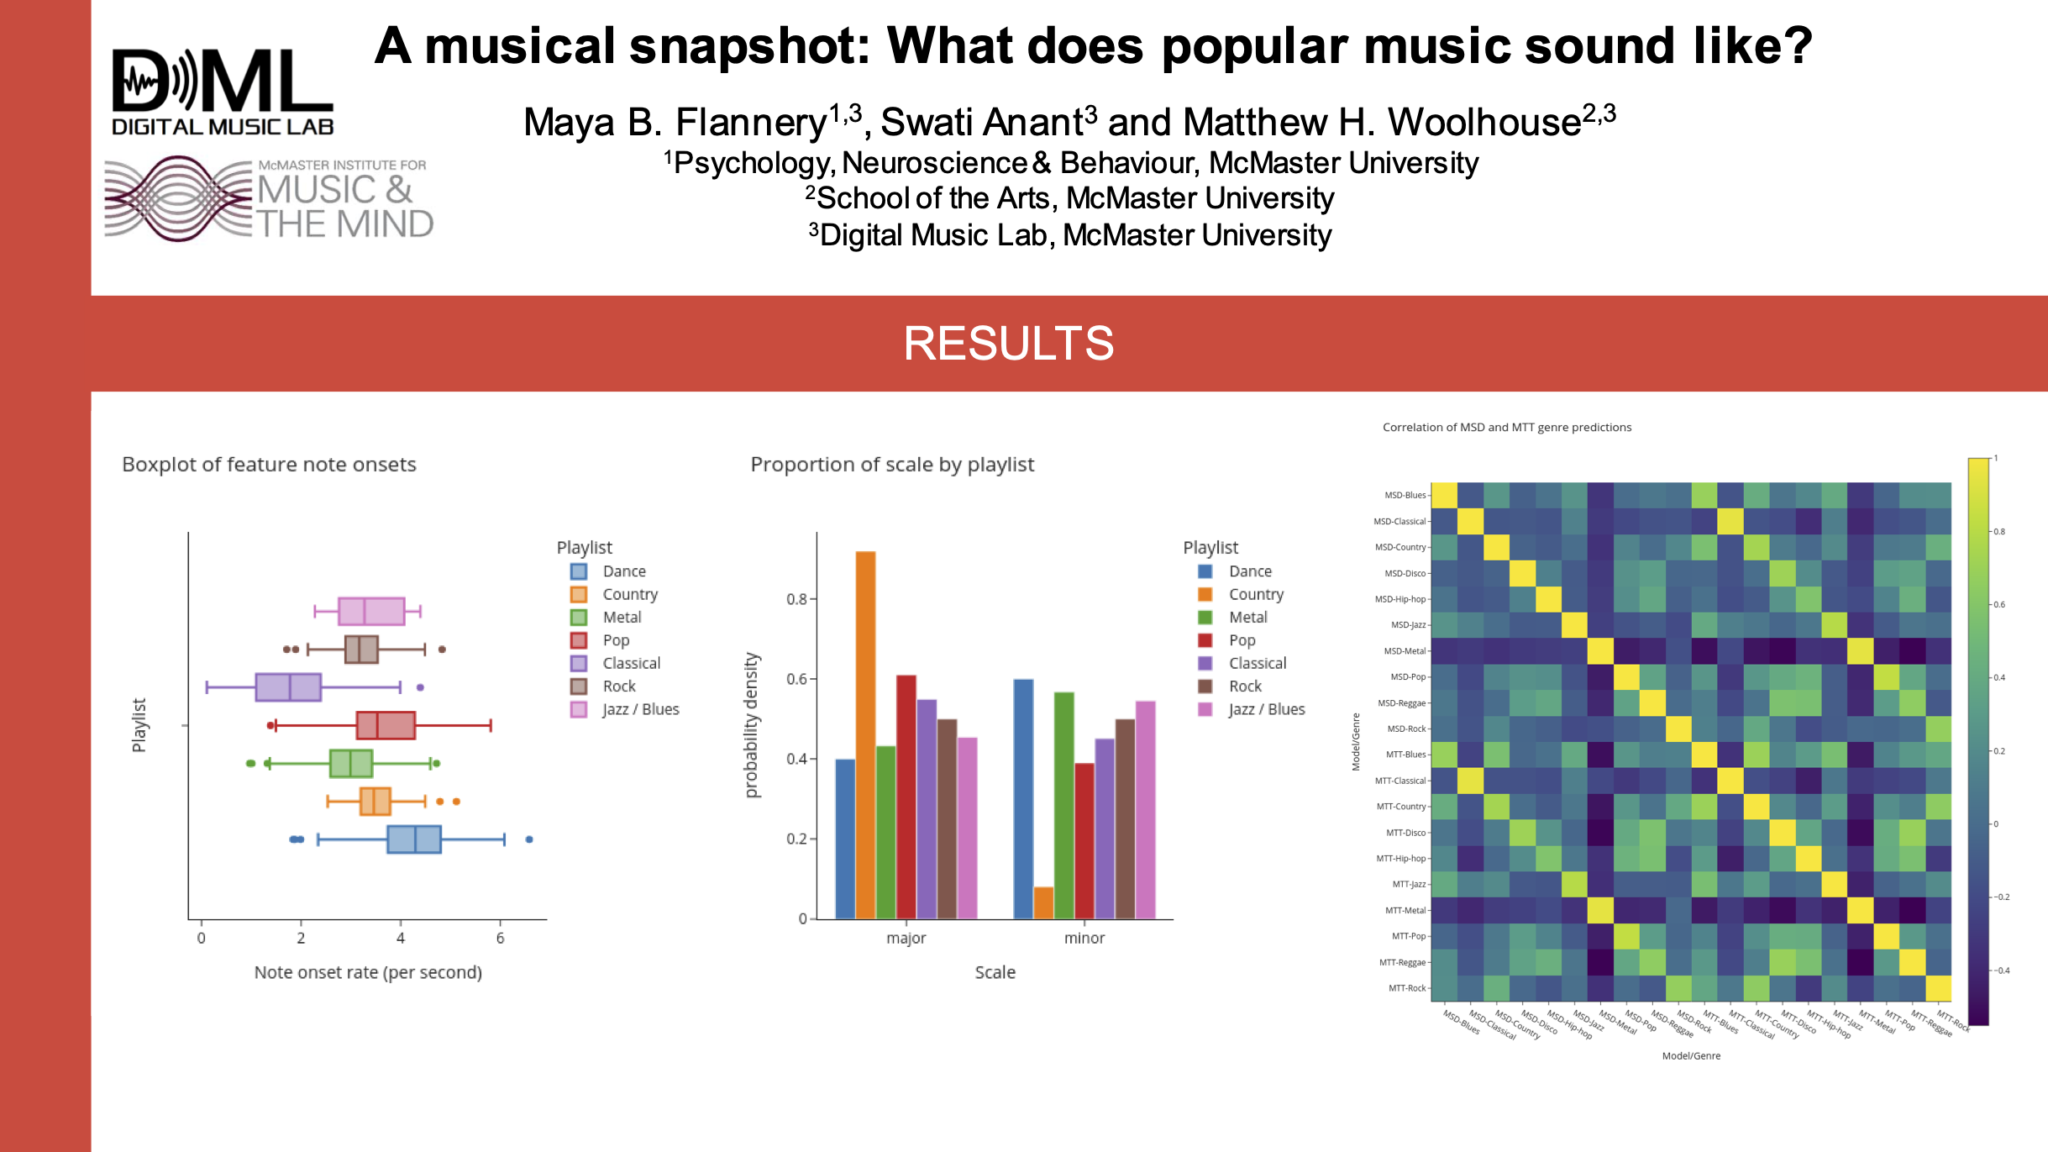 Part of the digital poster for "A musical snapshot: What does popular music sound like?" by Maya B. Flannery, Swati Anant, and Matthew H. Woolhouse. This slide goes over the results.